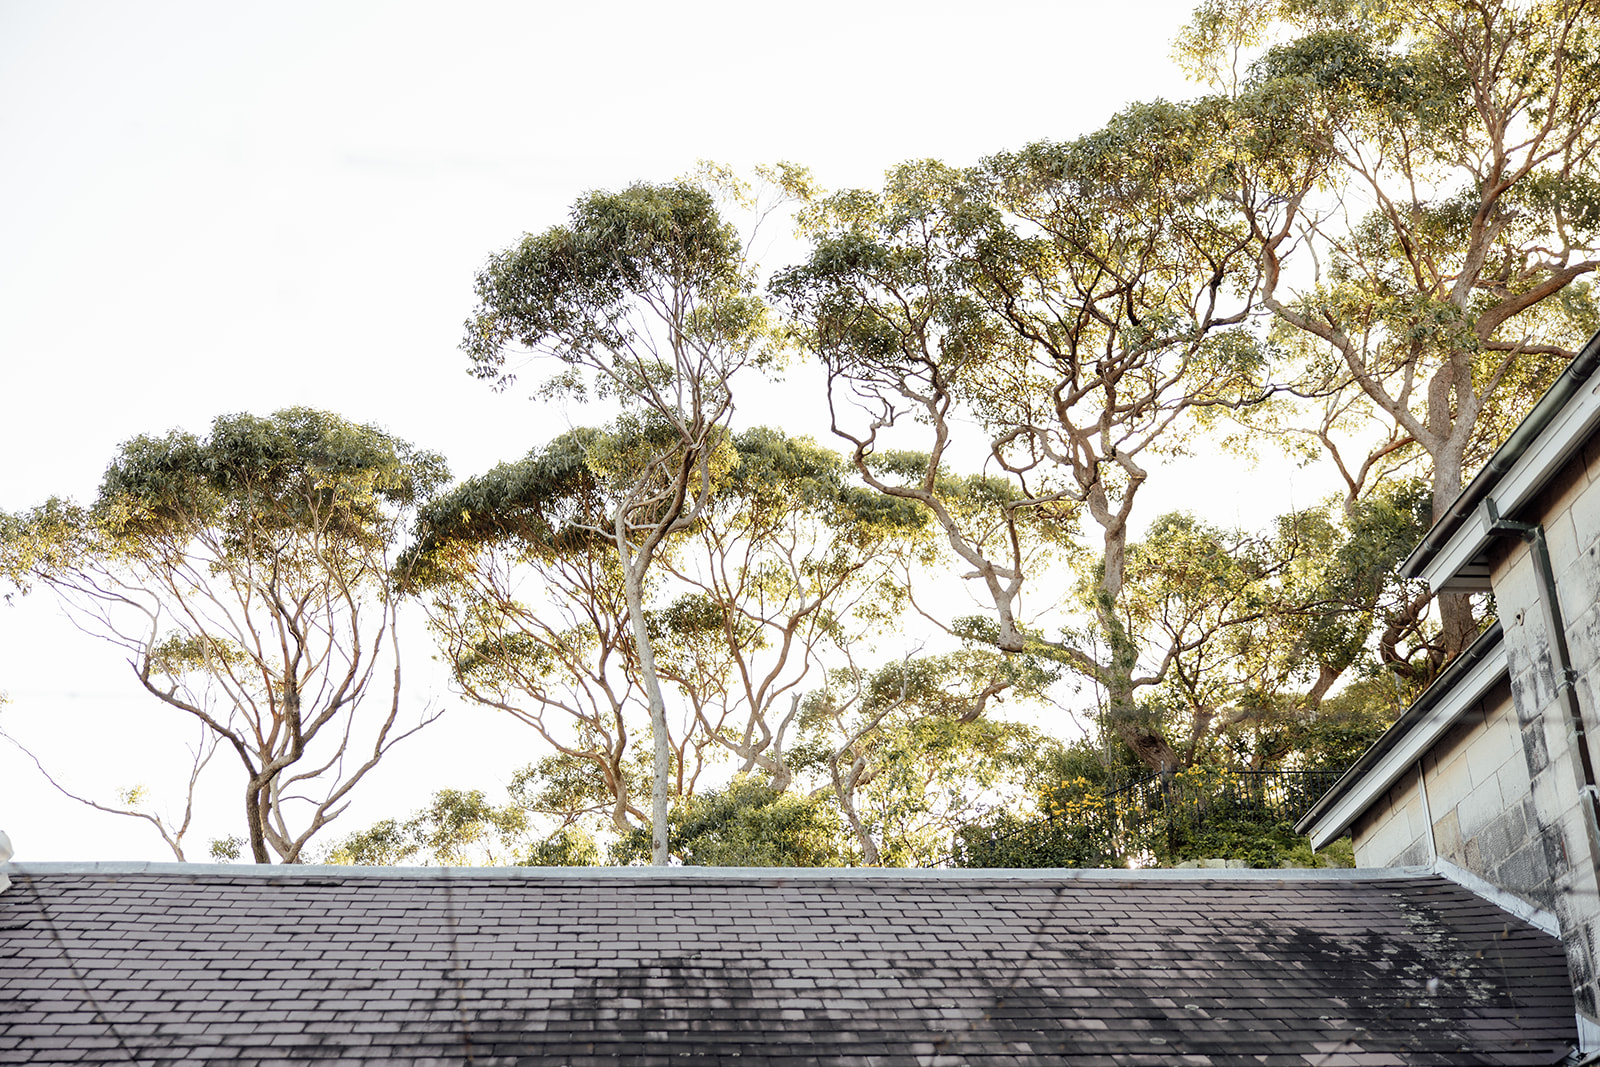 A landscape of the top of a roof with trees and afternoon sunlight